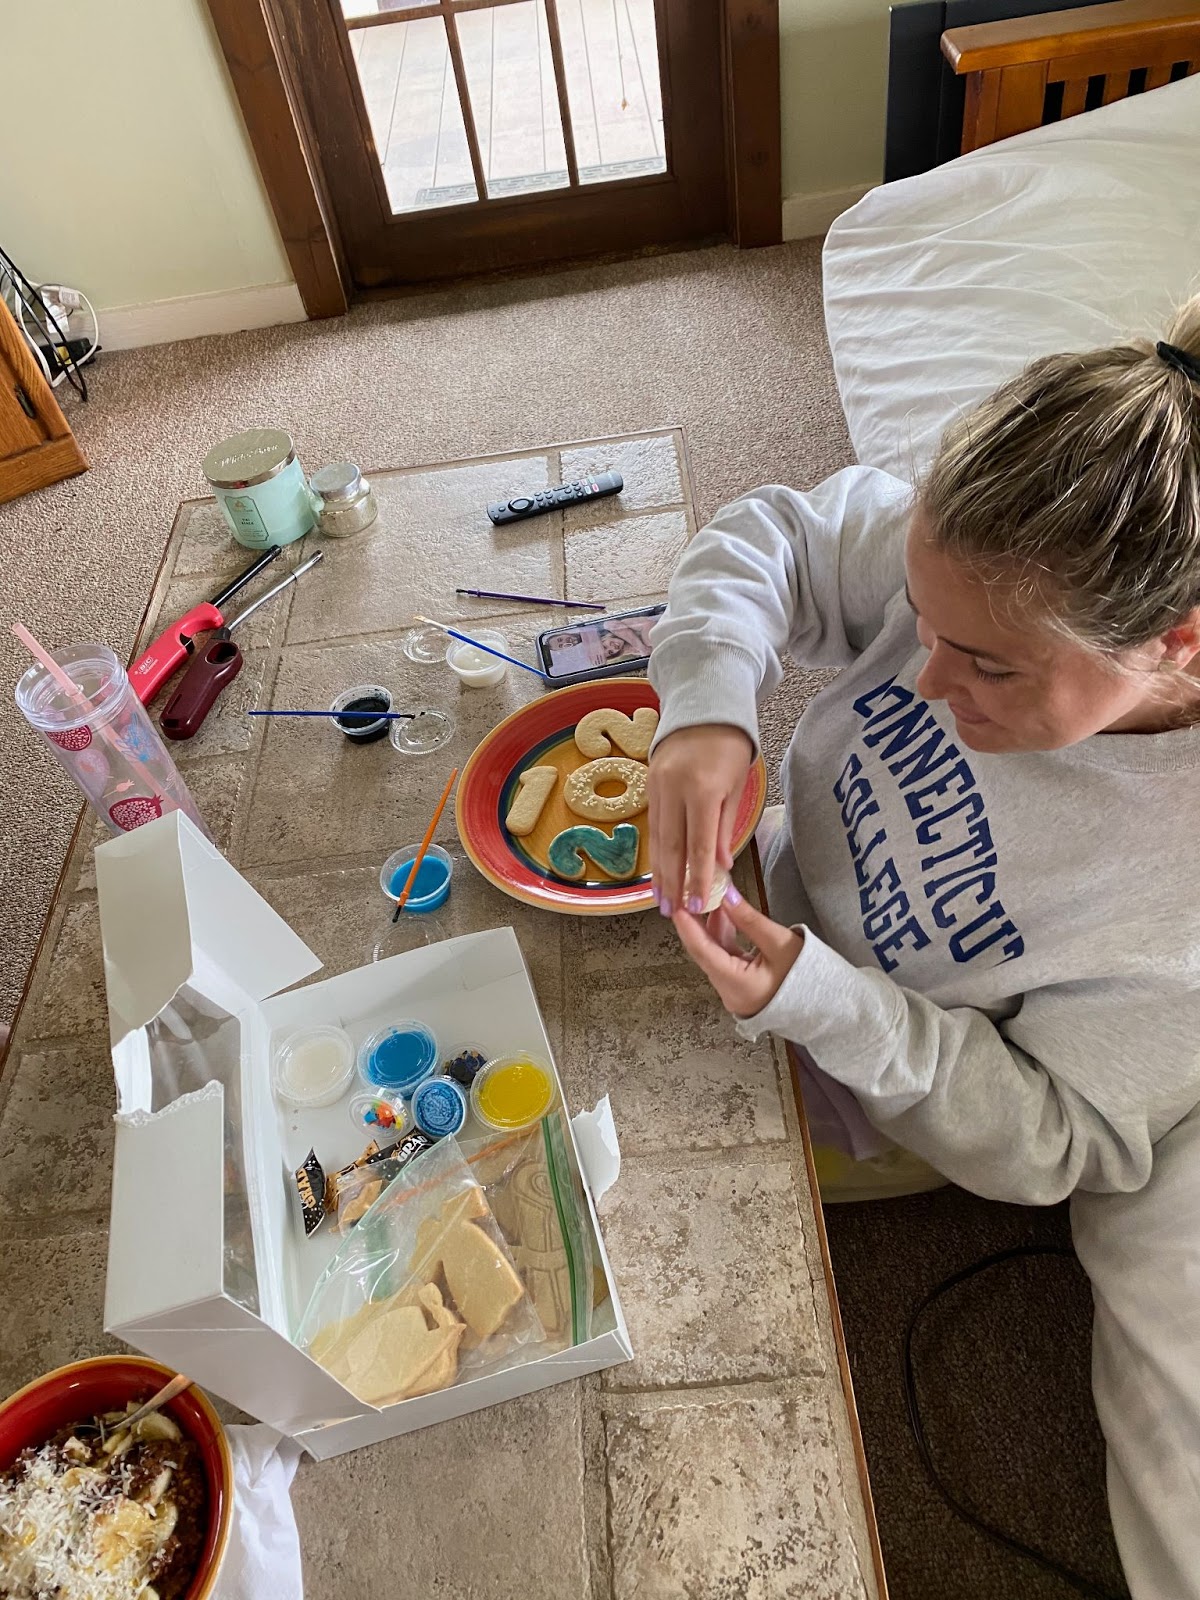 Student with a Connecticut College shirt on decorates cookies with colored frosting.